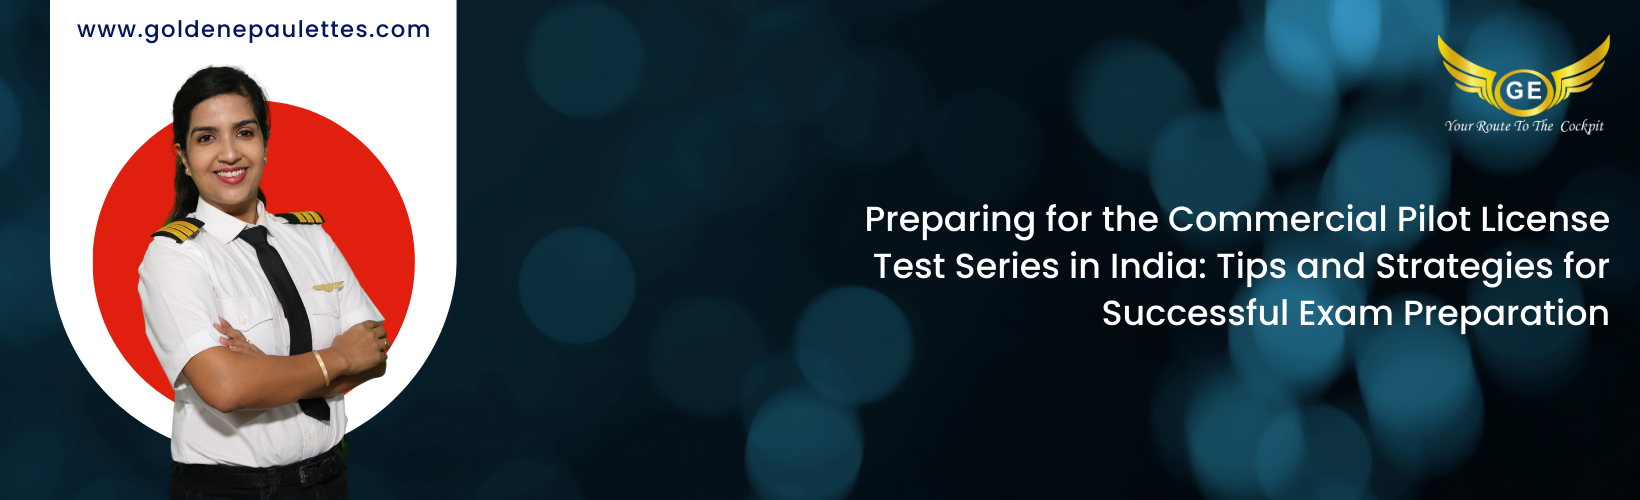 Preparing for the Commercial Pilot License Test Series in India